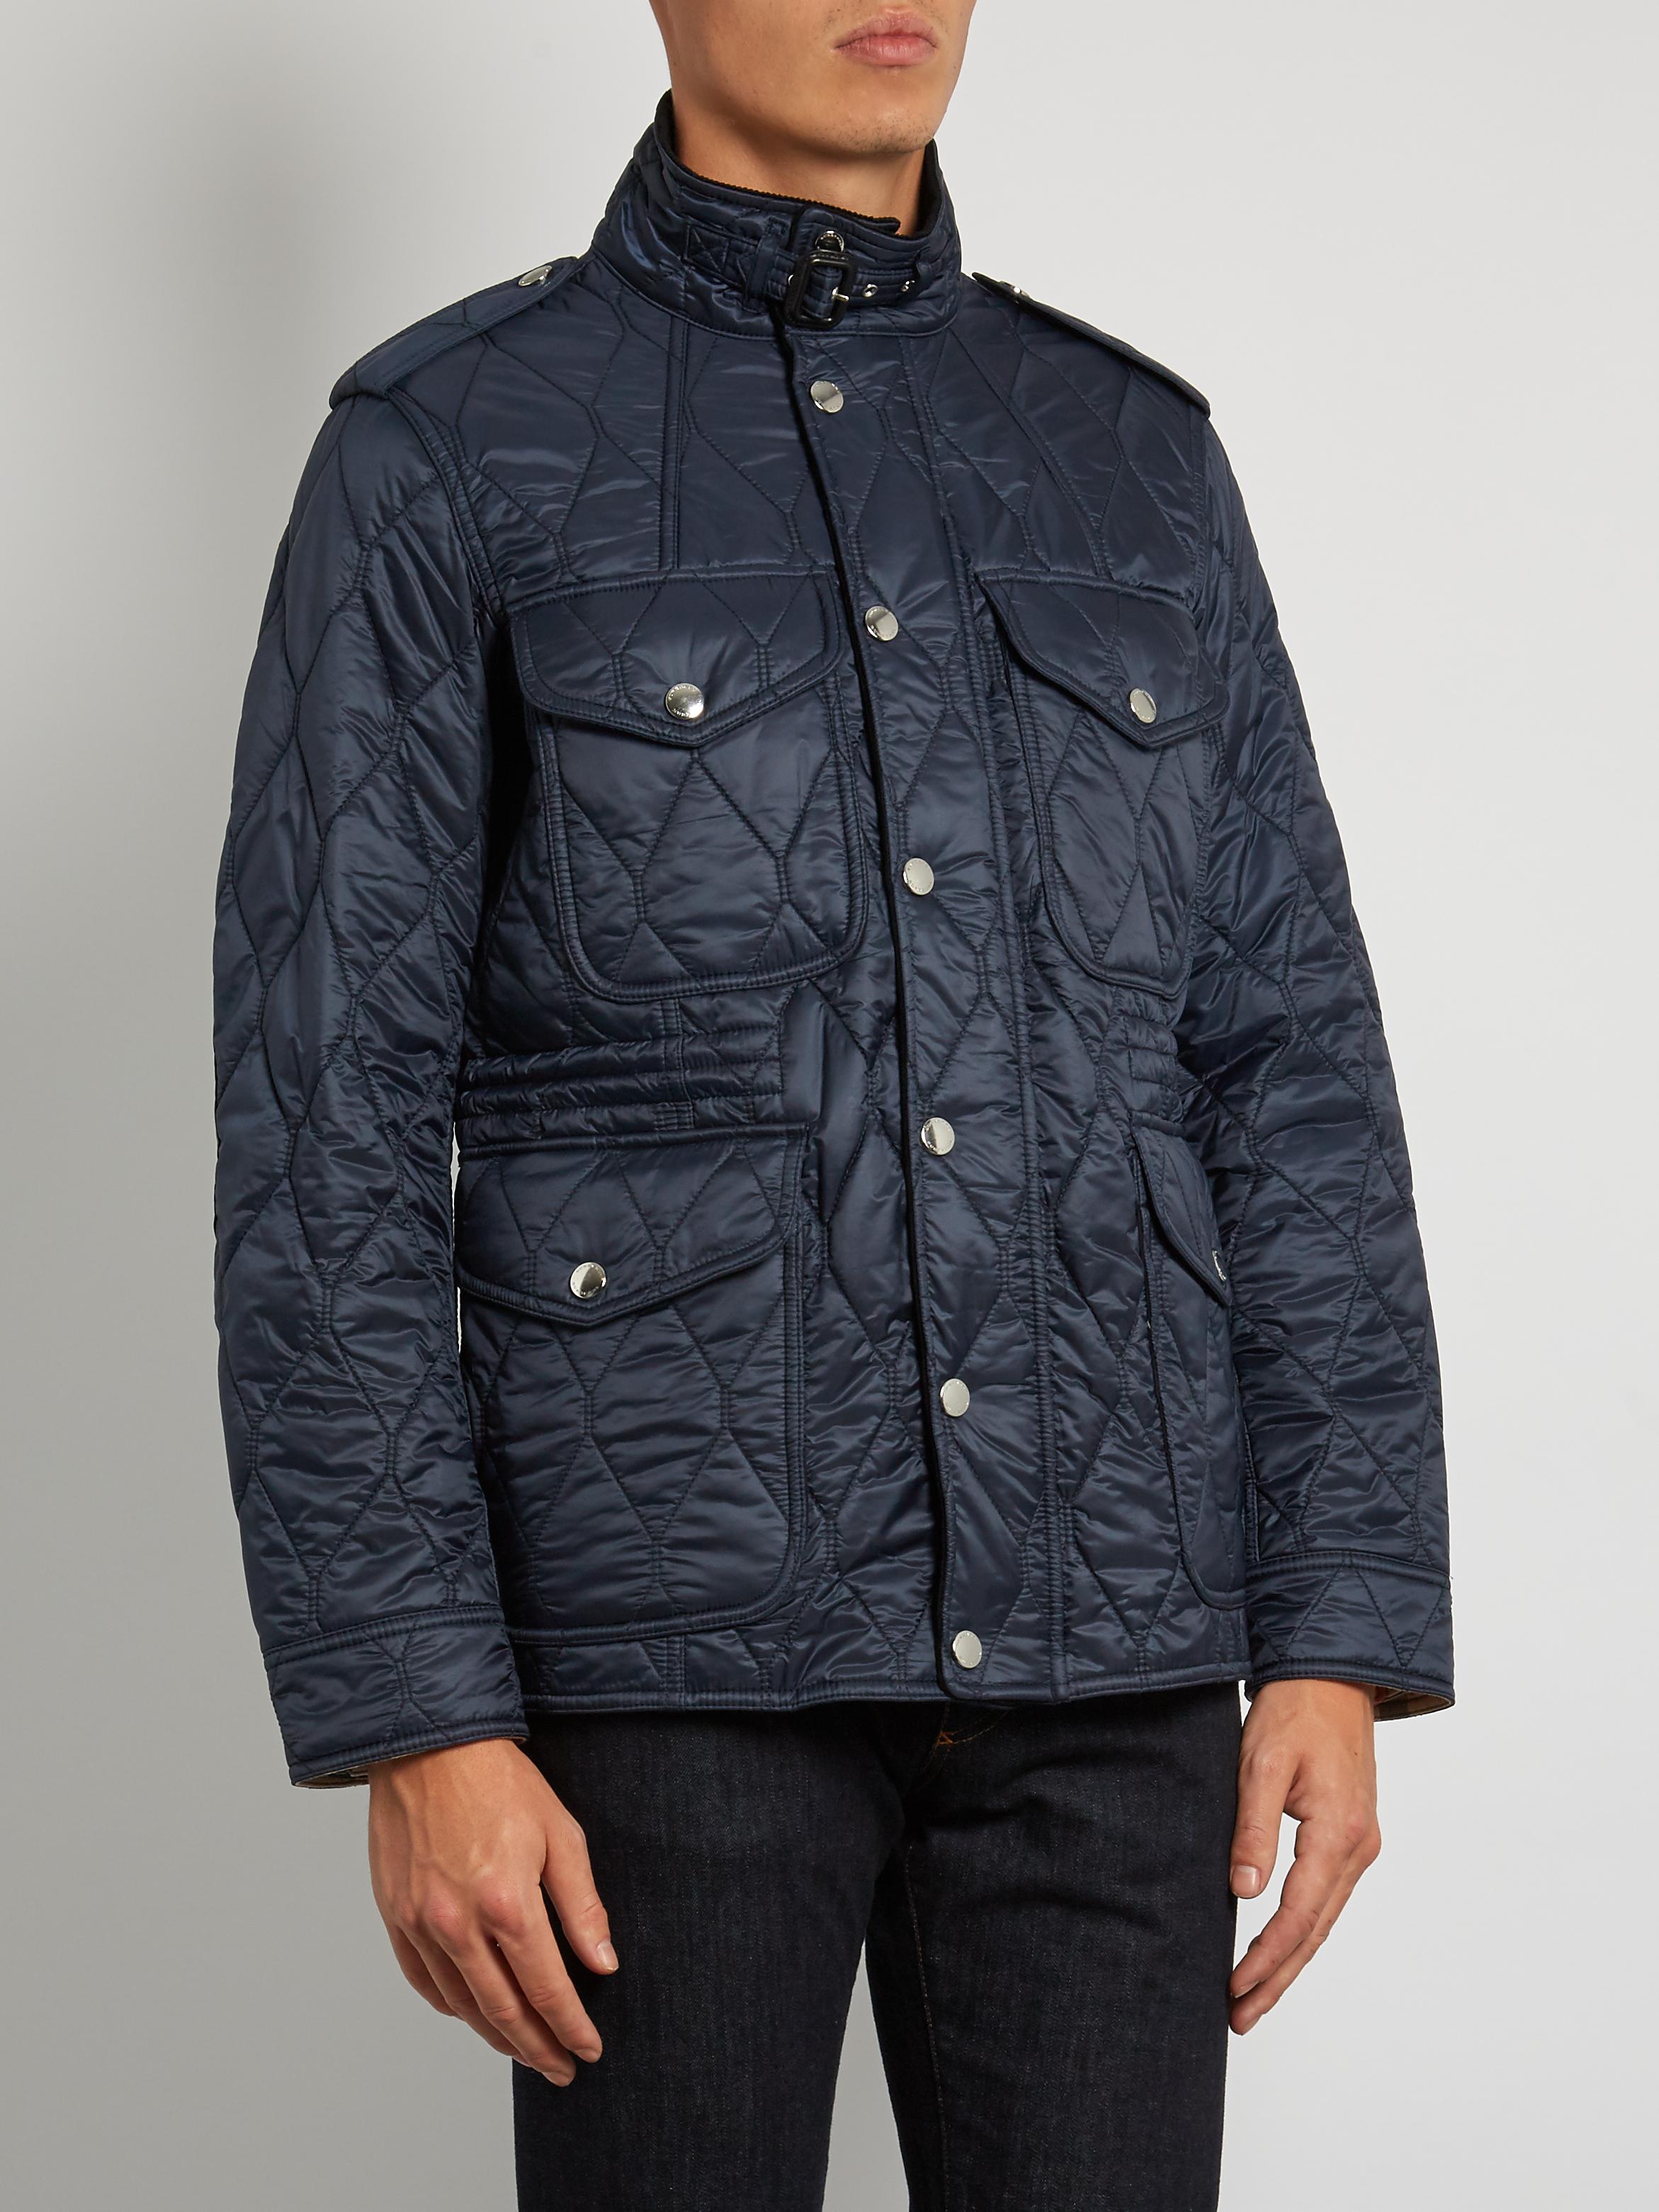 Burberry Leather Quilted Field Jacket in Navy (Blue) for Men - Lyst